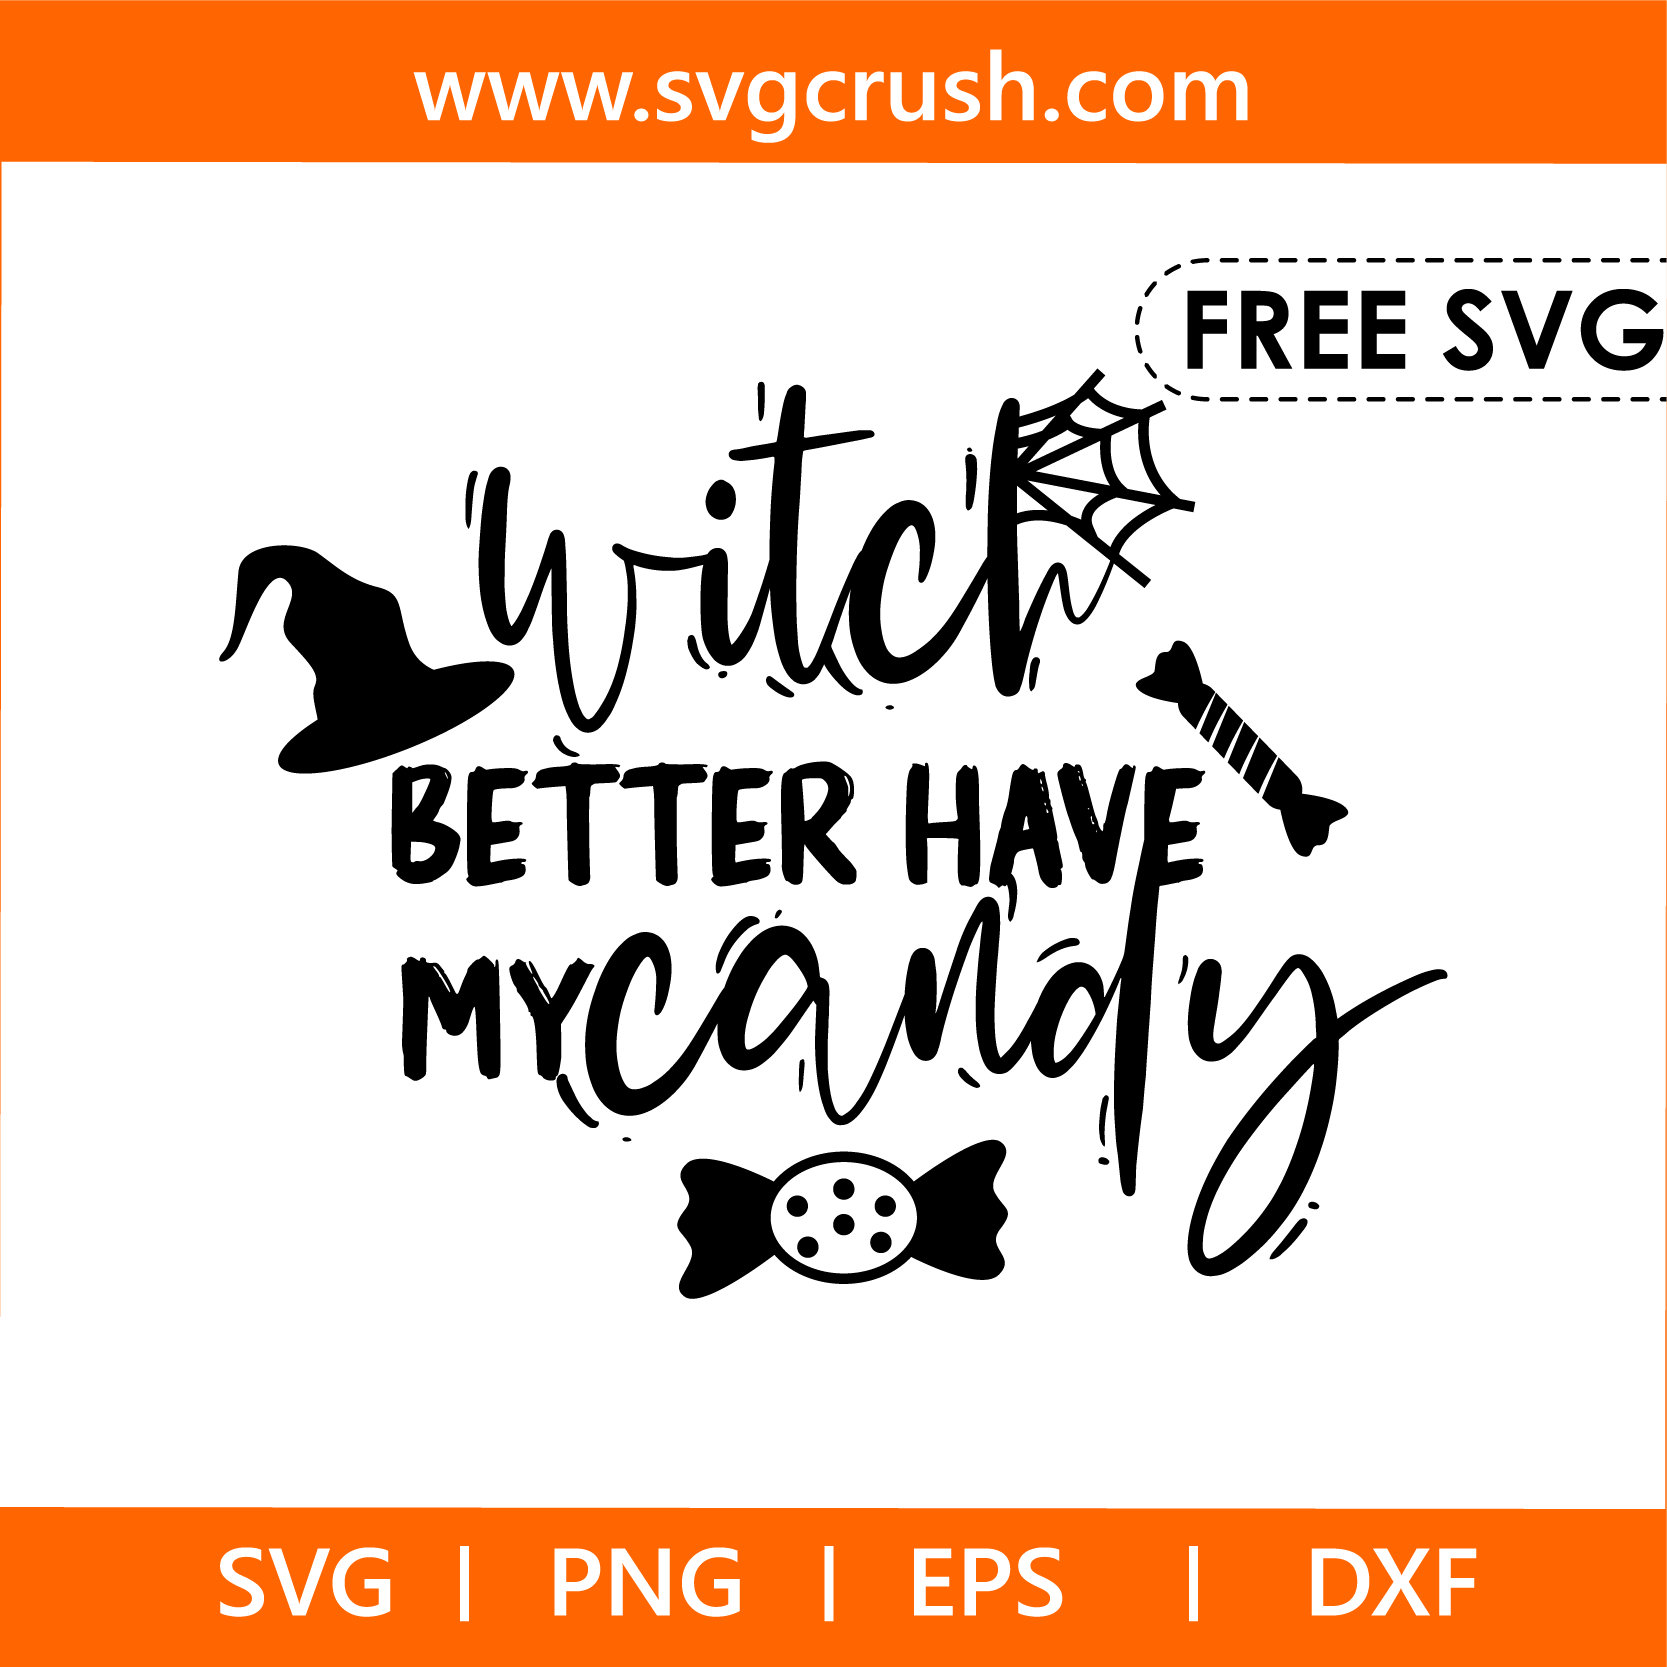 free witch-better-have-my-candy-003 svg